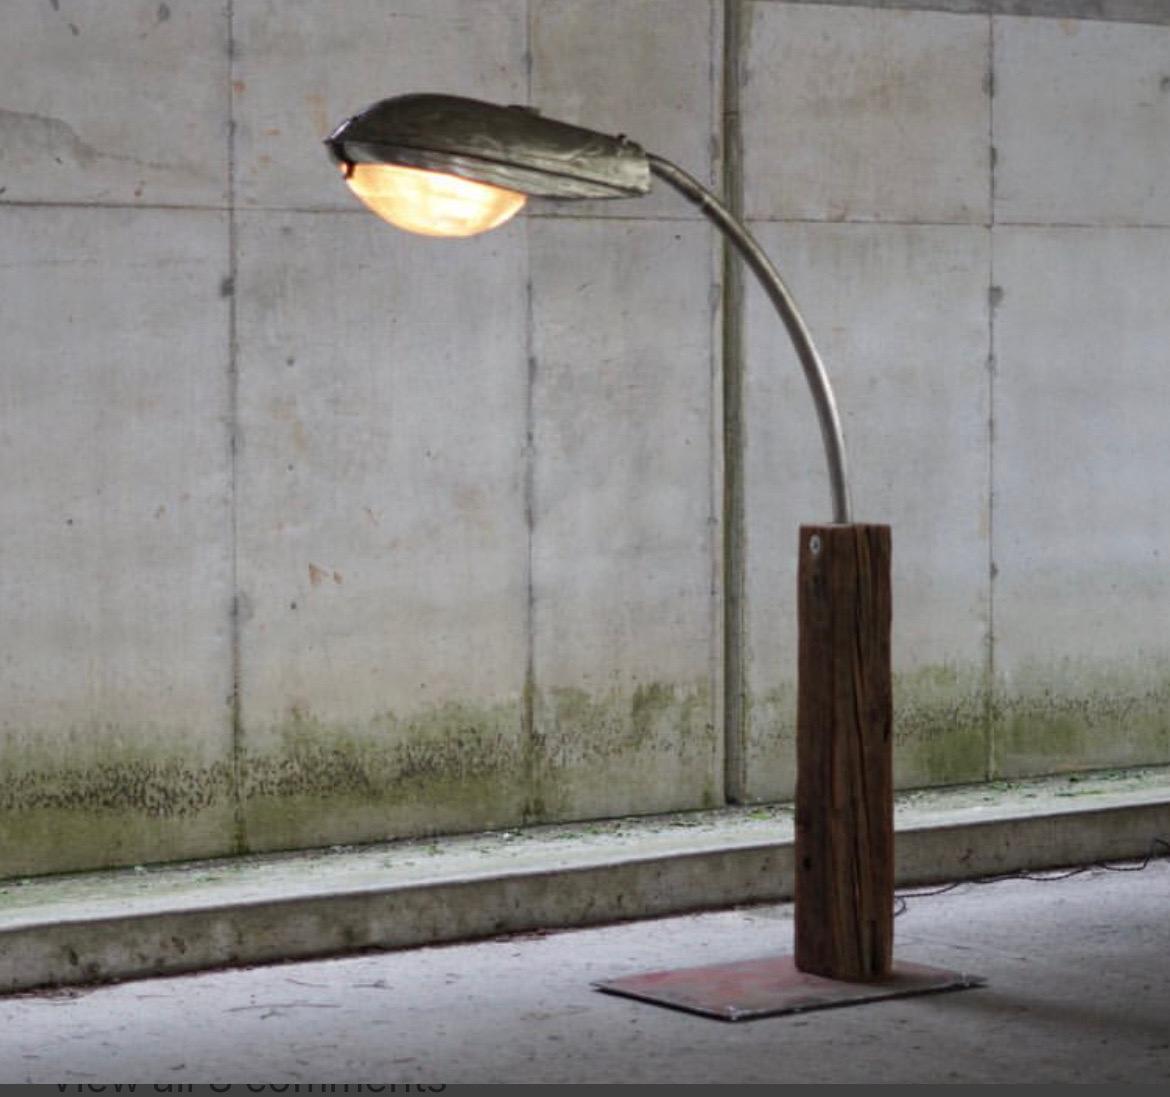 Extra large (6 foot) industrial chic floor lamp. A true show stopper and conversation piece. Made in 2021 in Pennsylvania. 

Unique, custom made industrial floor lamp using genuine General Electric Corporation street light.

Heavy rustic red metal